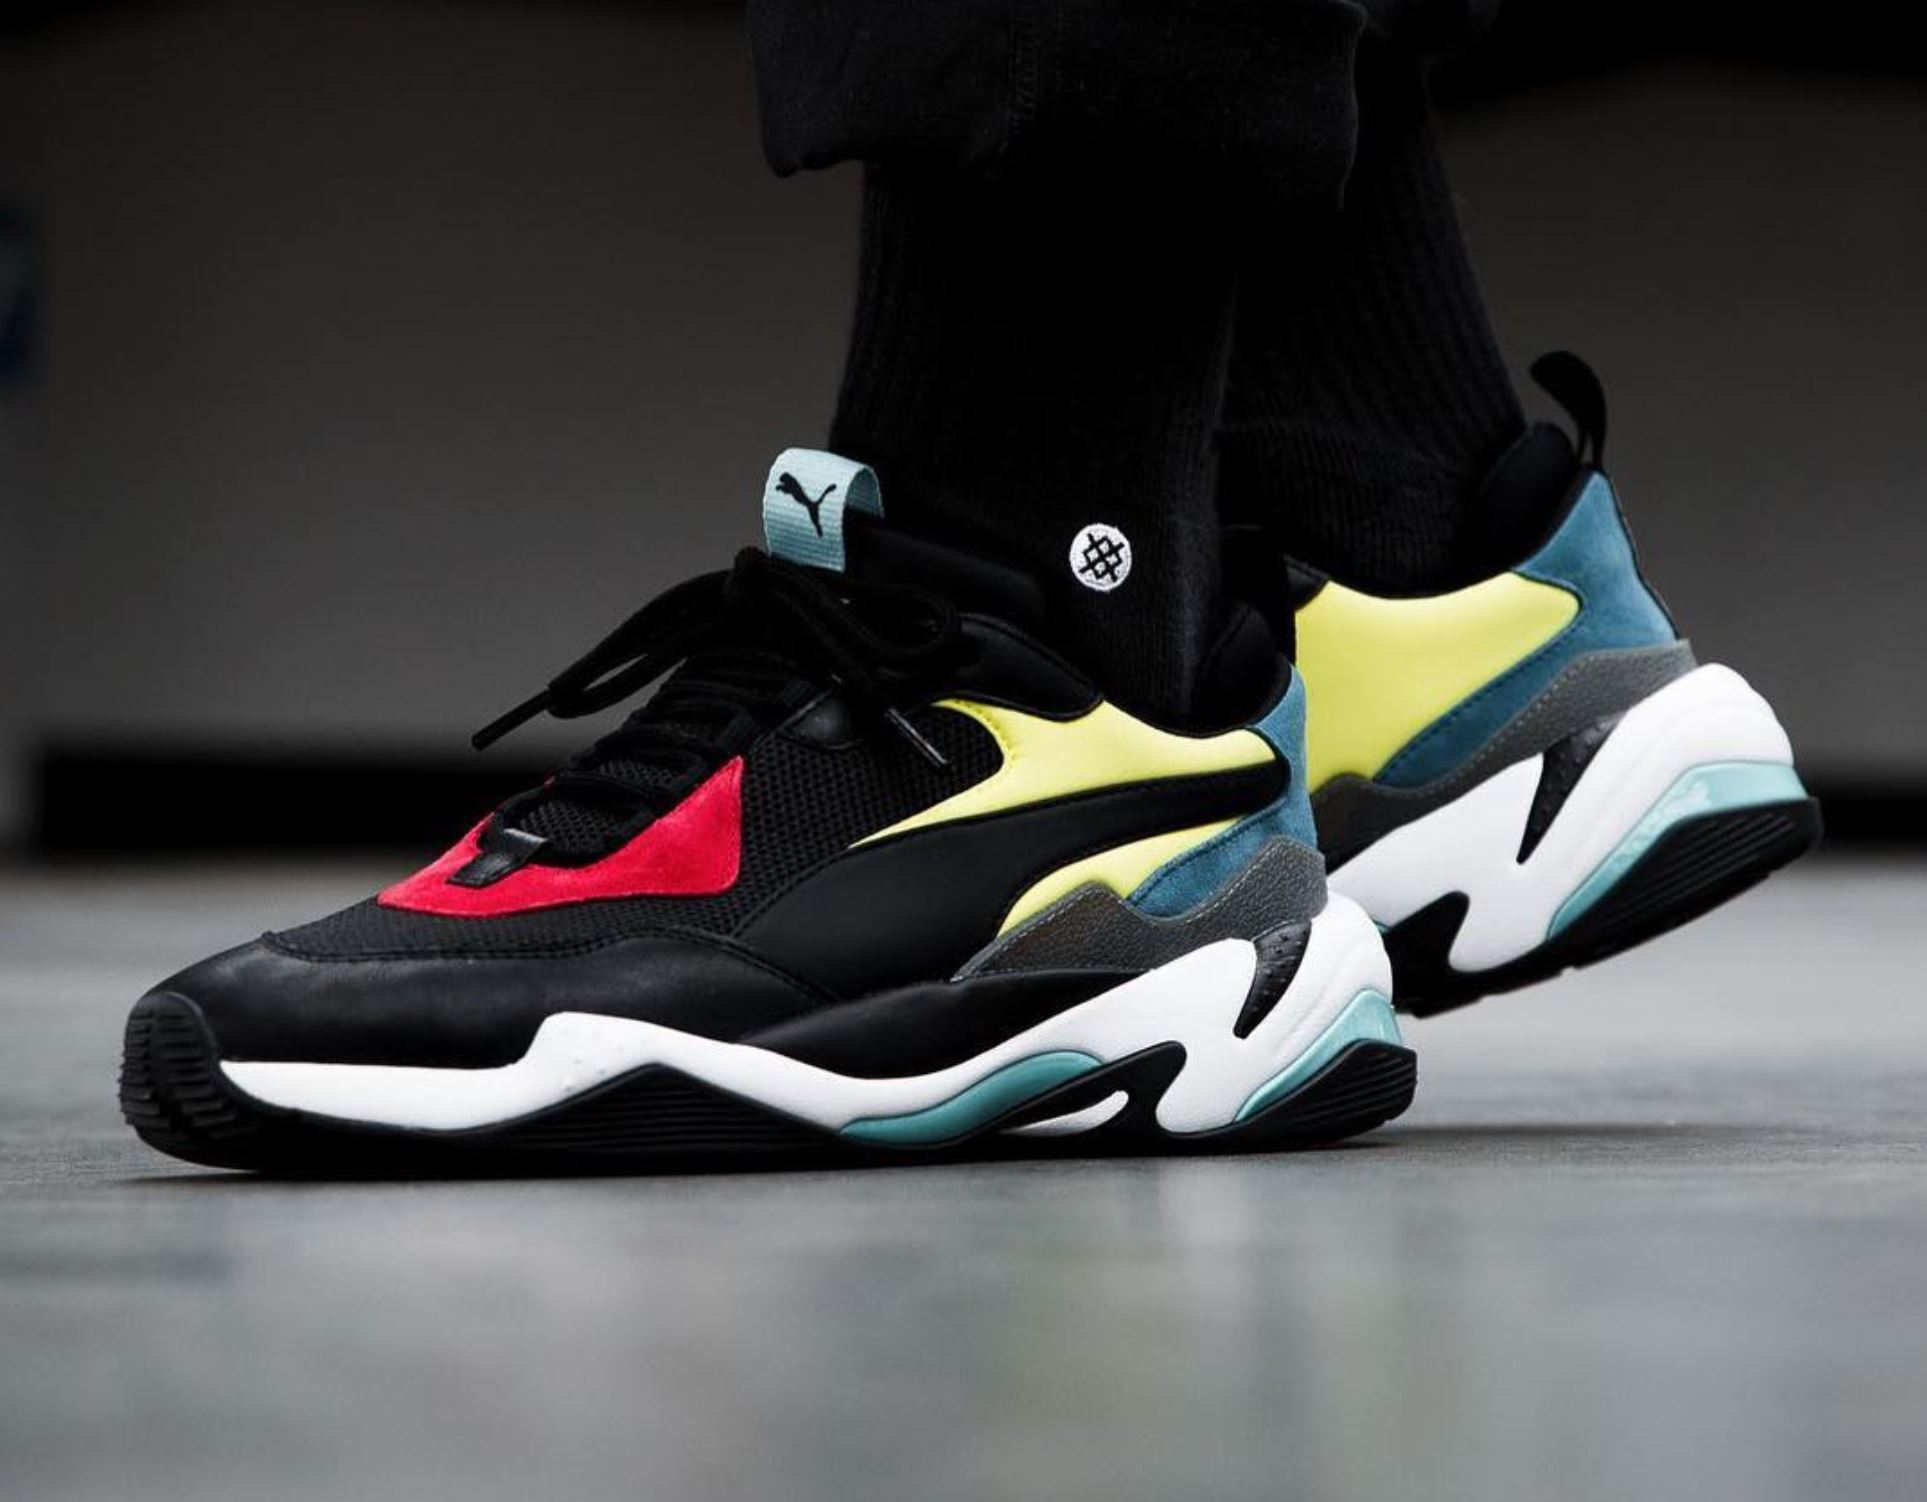 The Puma Thunder Spectra Release Date 